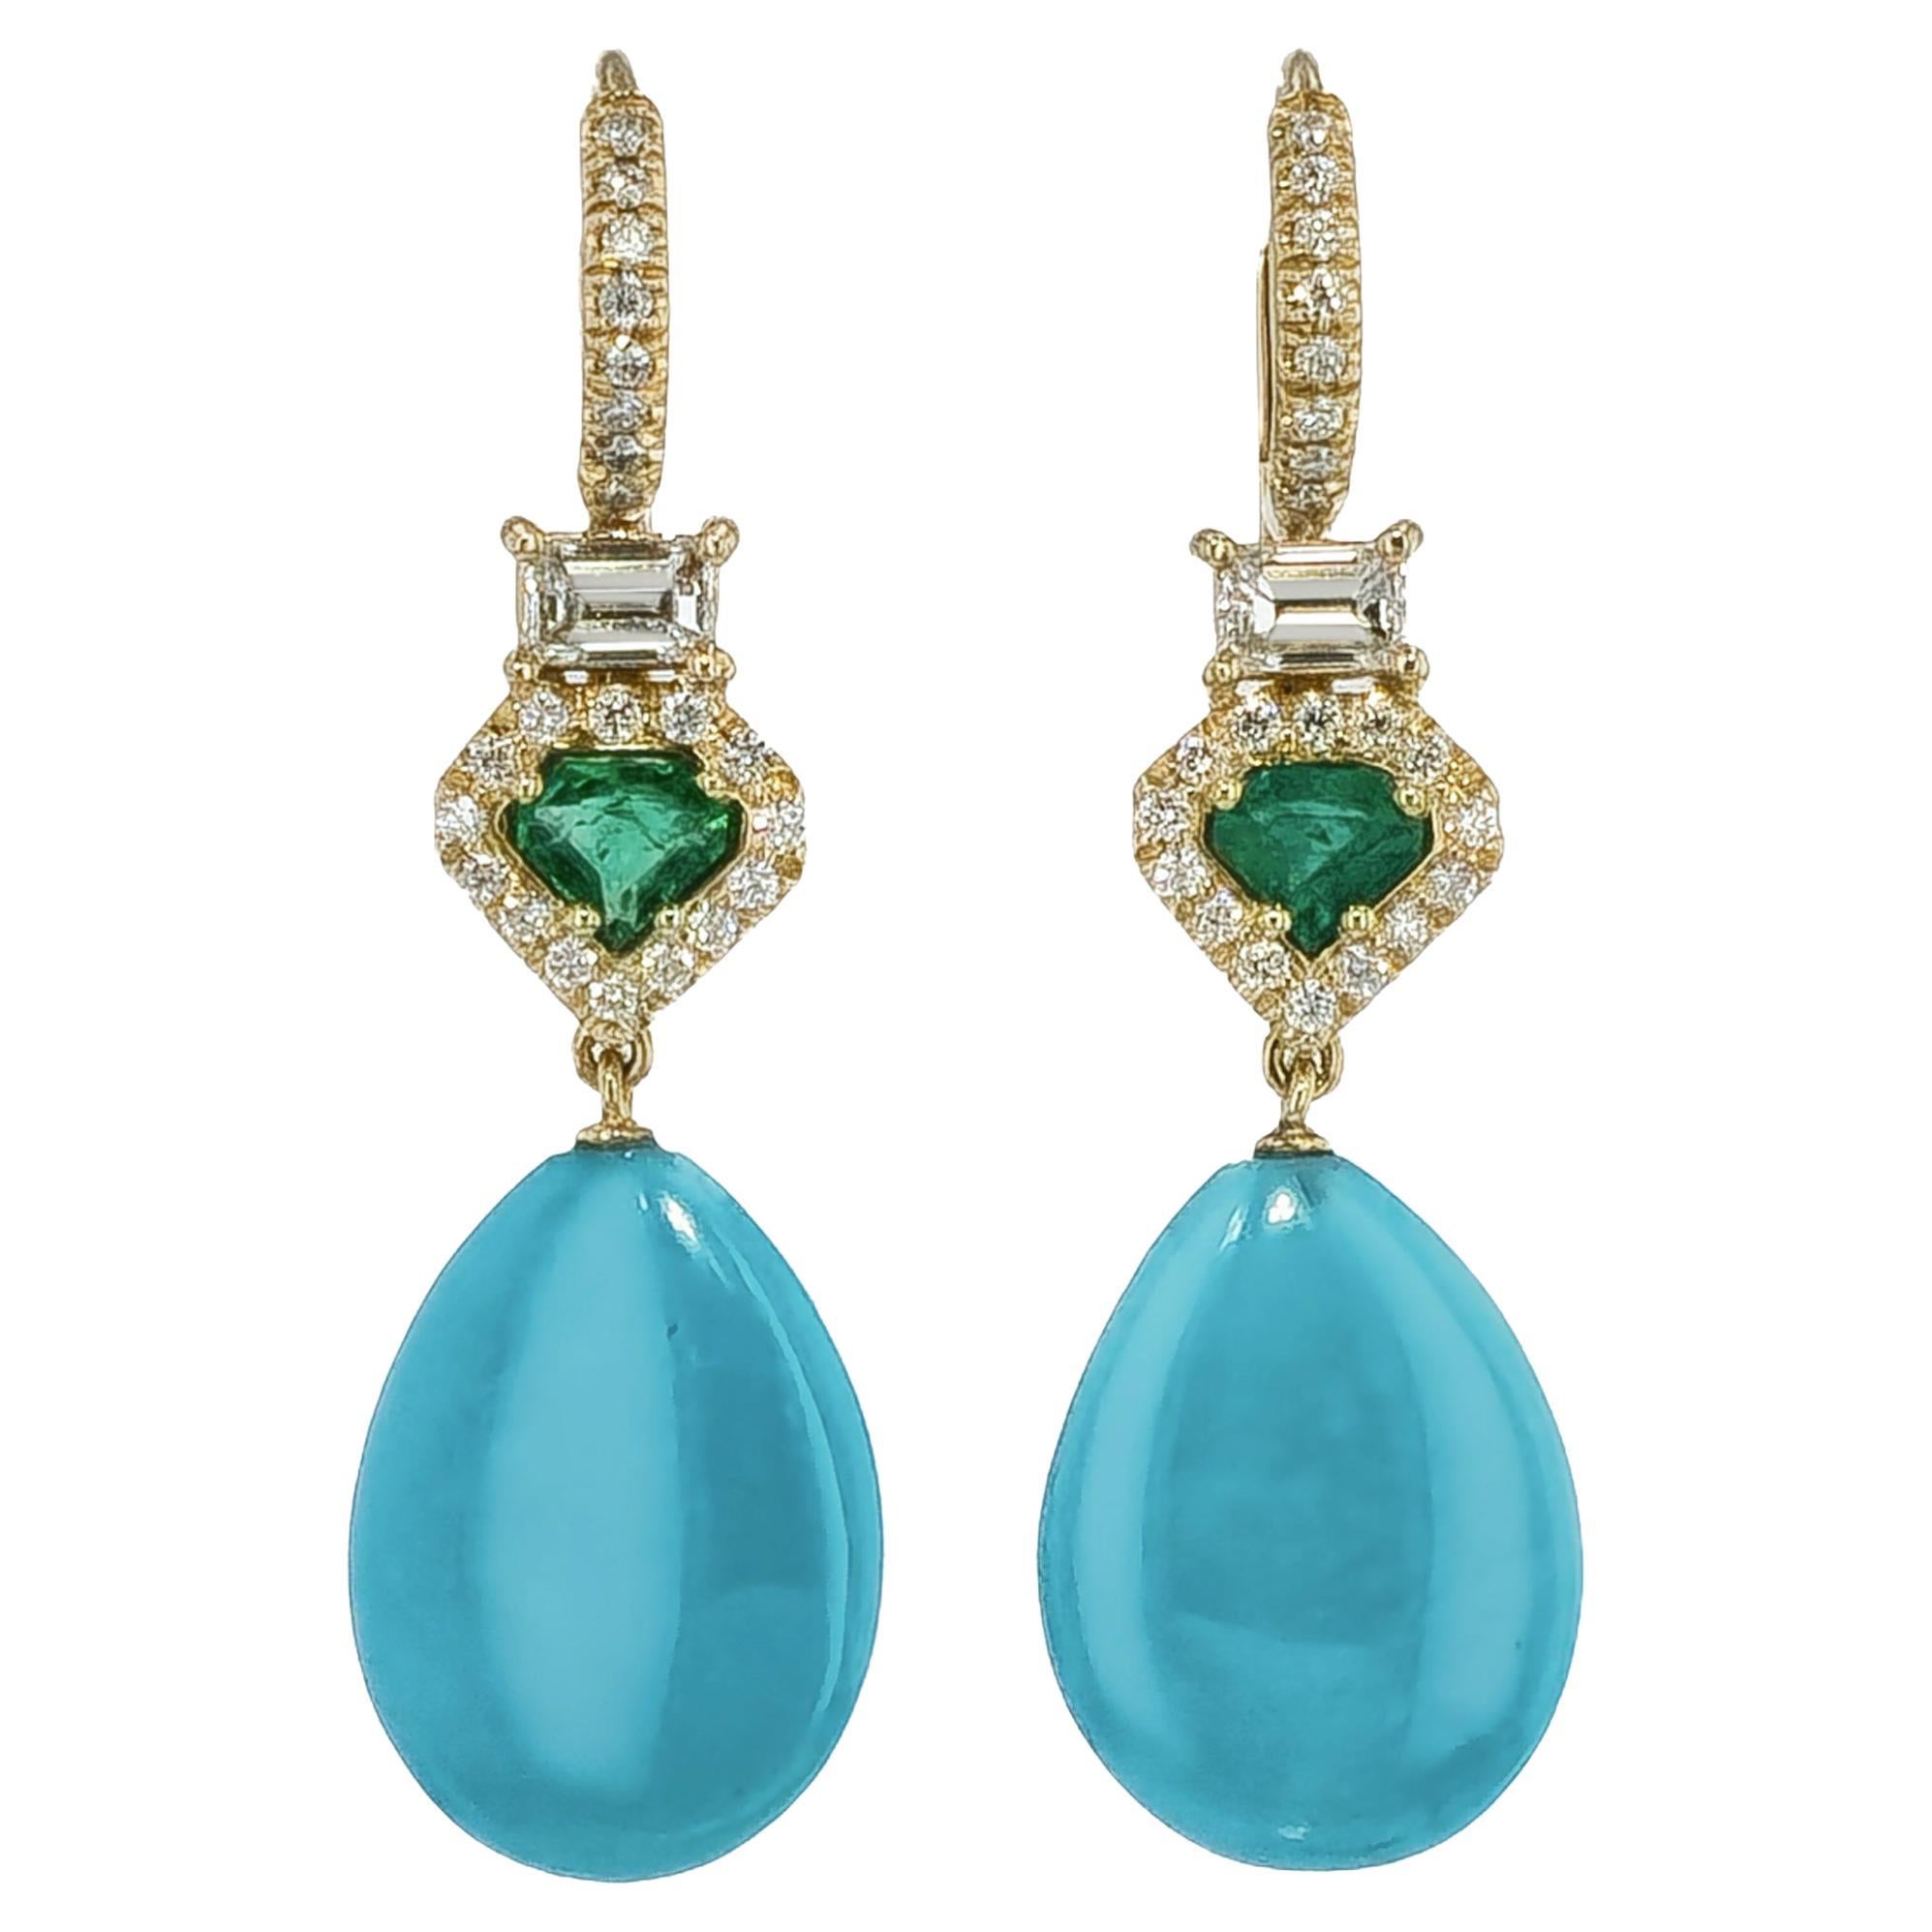 Handmade Turquoise Yellow Gold Emerald Cut and Diamond Pave Drop Earrings